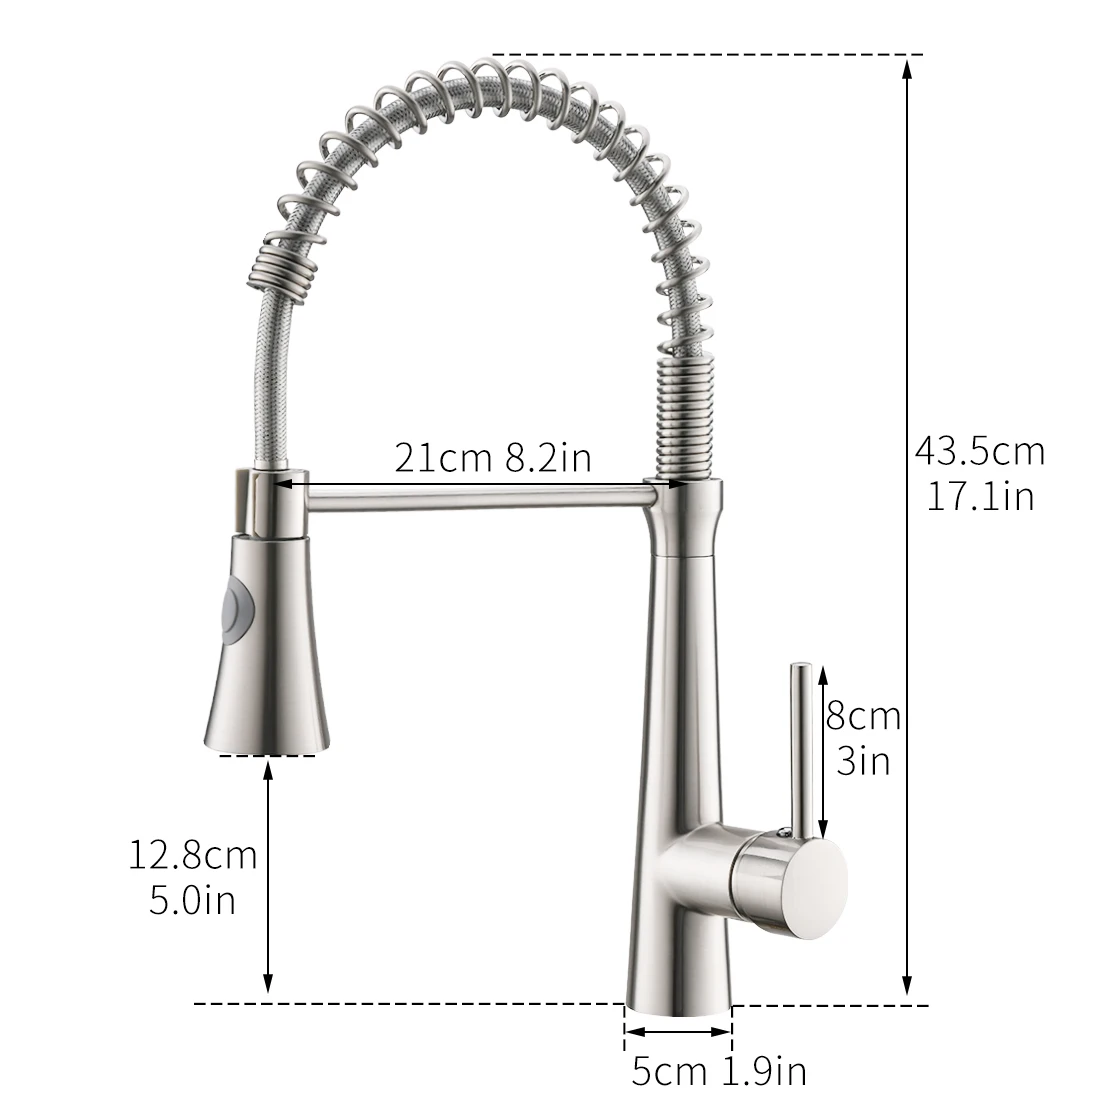 Brushed Finish Sus 304 Stainless Steel Flexible Hose Pull Out Kitchen ...